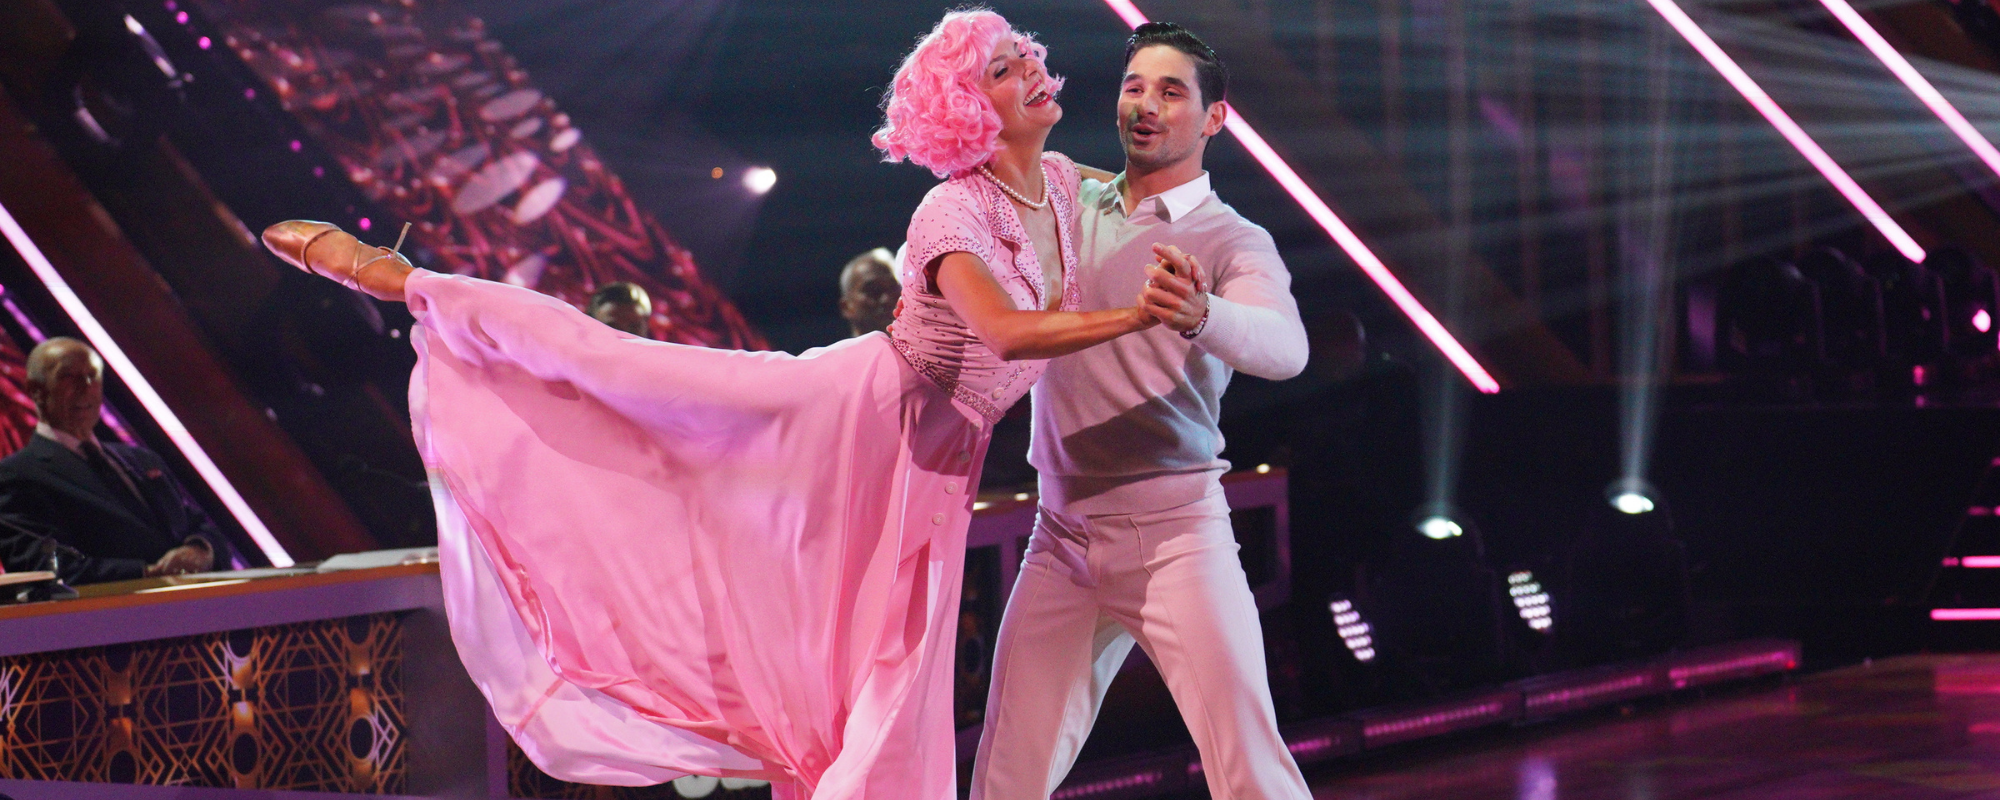 Frankie Avalon Surprises Amanda Kloots and Alan Bersten on ‘DWTS’ to Perform “Beauty School Dropout” from ‘Grease’